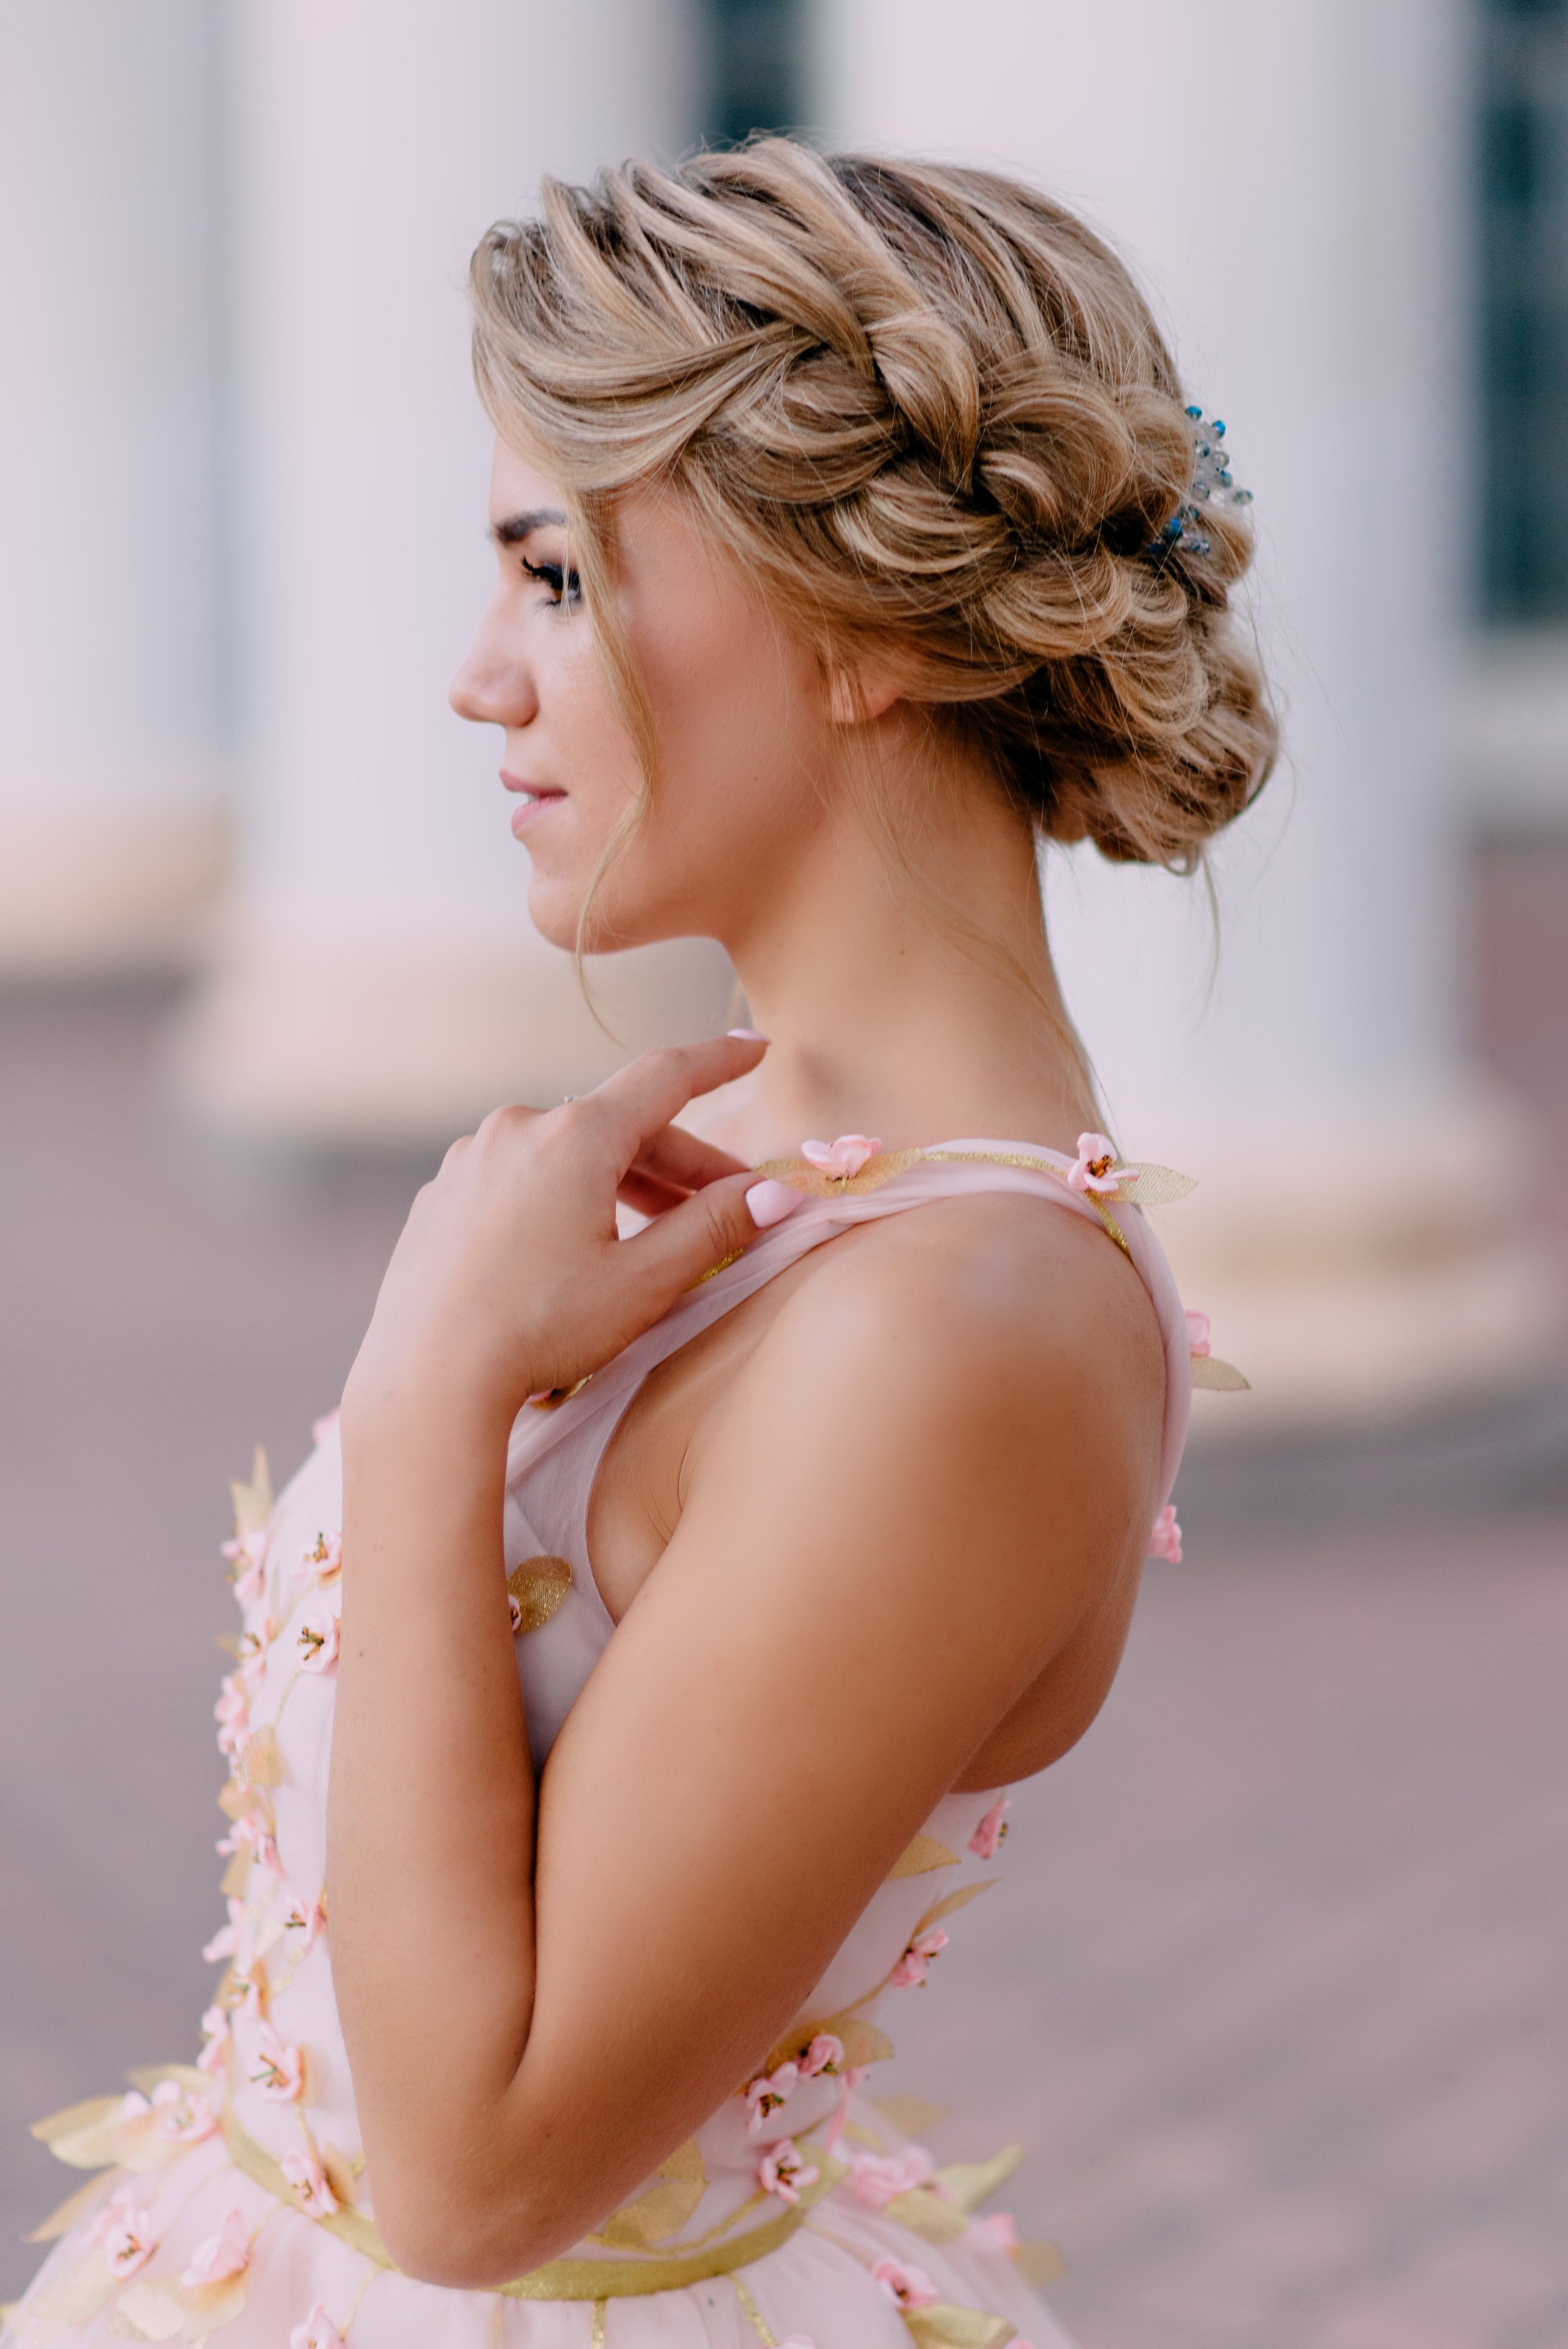 How To Choose A Wedding Hairstyle: Hair Types, Face Shapes & More